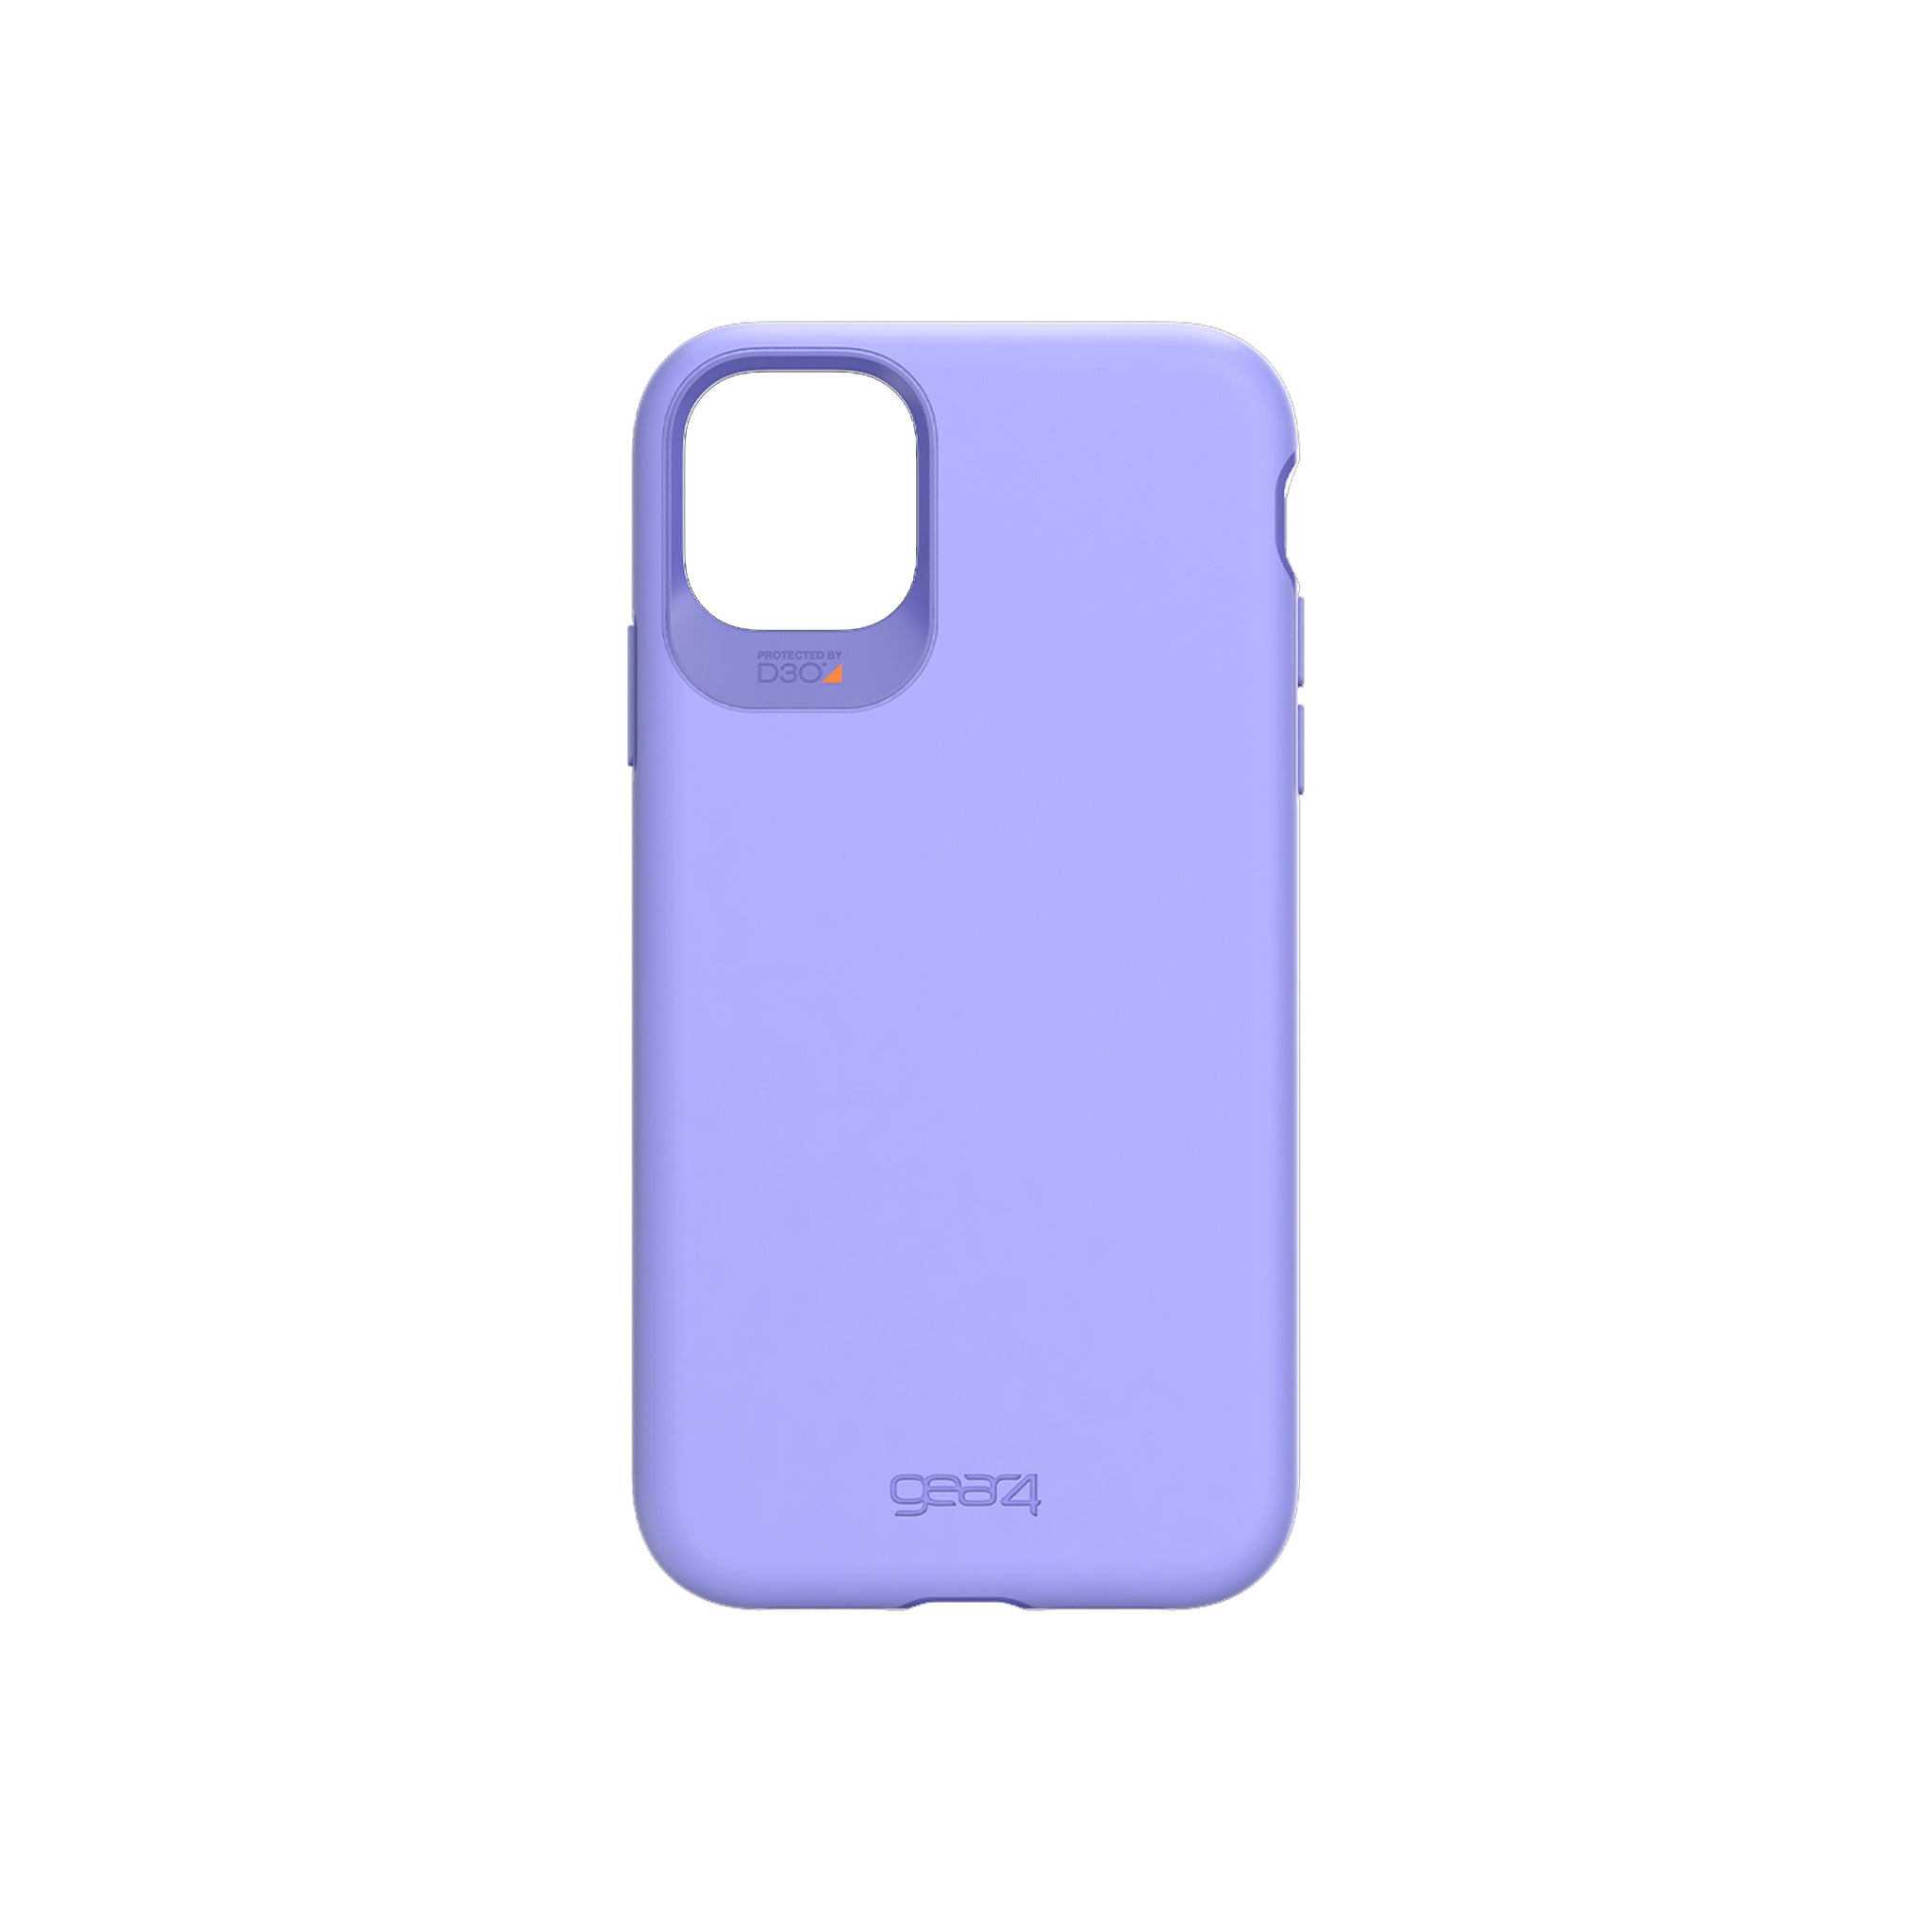 Gear4 - Holborn Case For Apple Iphone 11 - Lilac